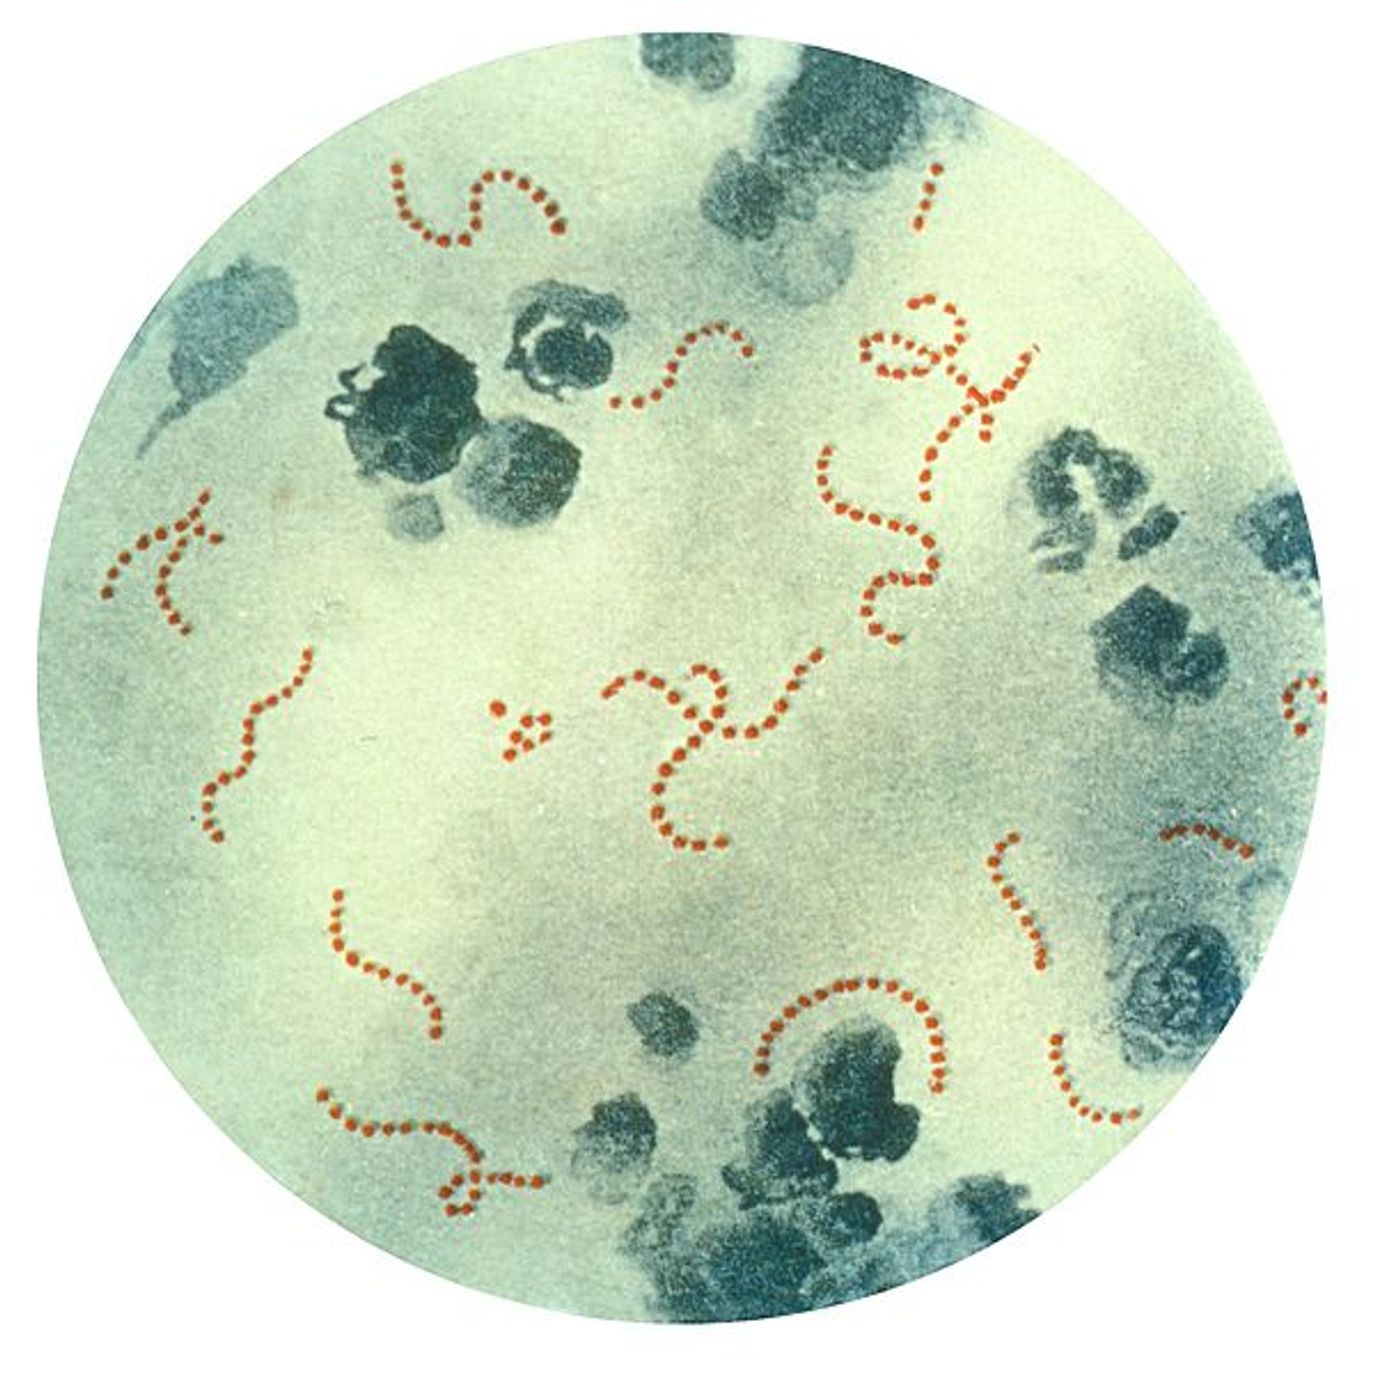 Photomicrograph of Streptococcus pyogenes bacteria / Credit: CDC